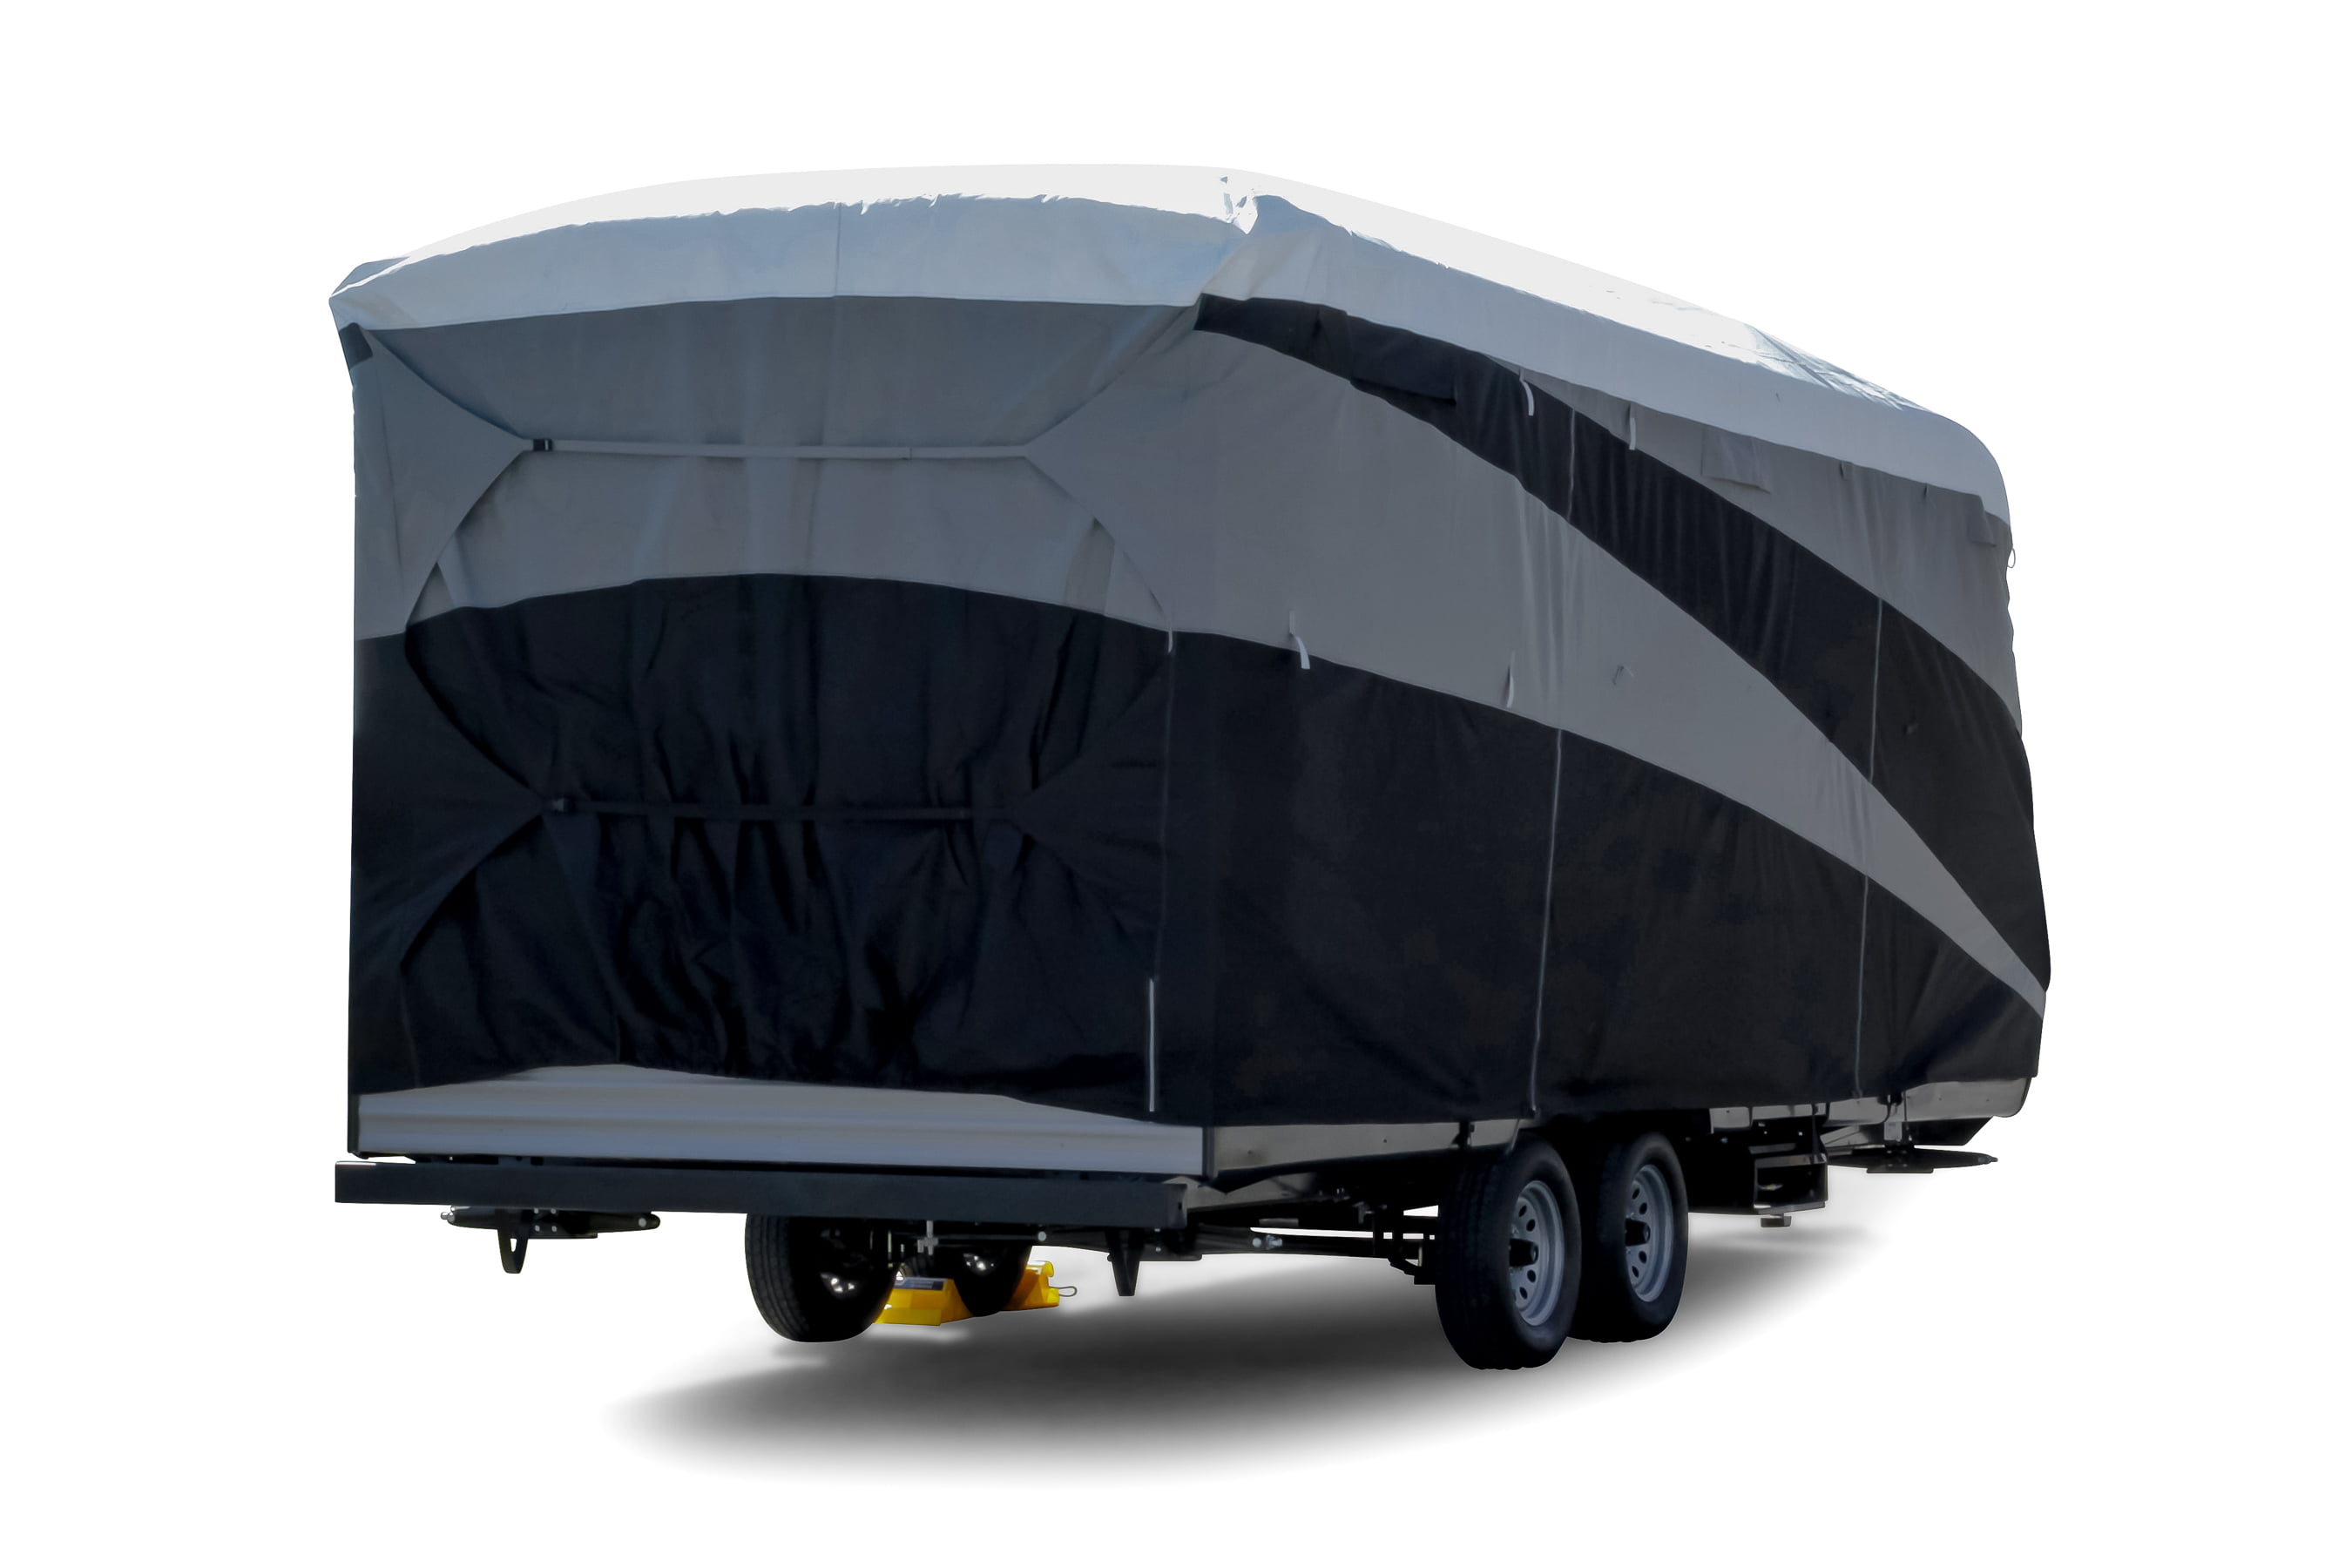 56164 Camco 30-336 ULTRAGuard Supreme RV Cover-Extremely Durable Design Fits Toy Hauler Trailers Weatherproof with UV Protection and Dupont Tyvek Top 